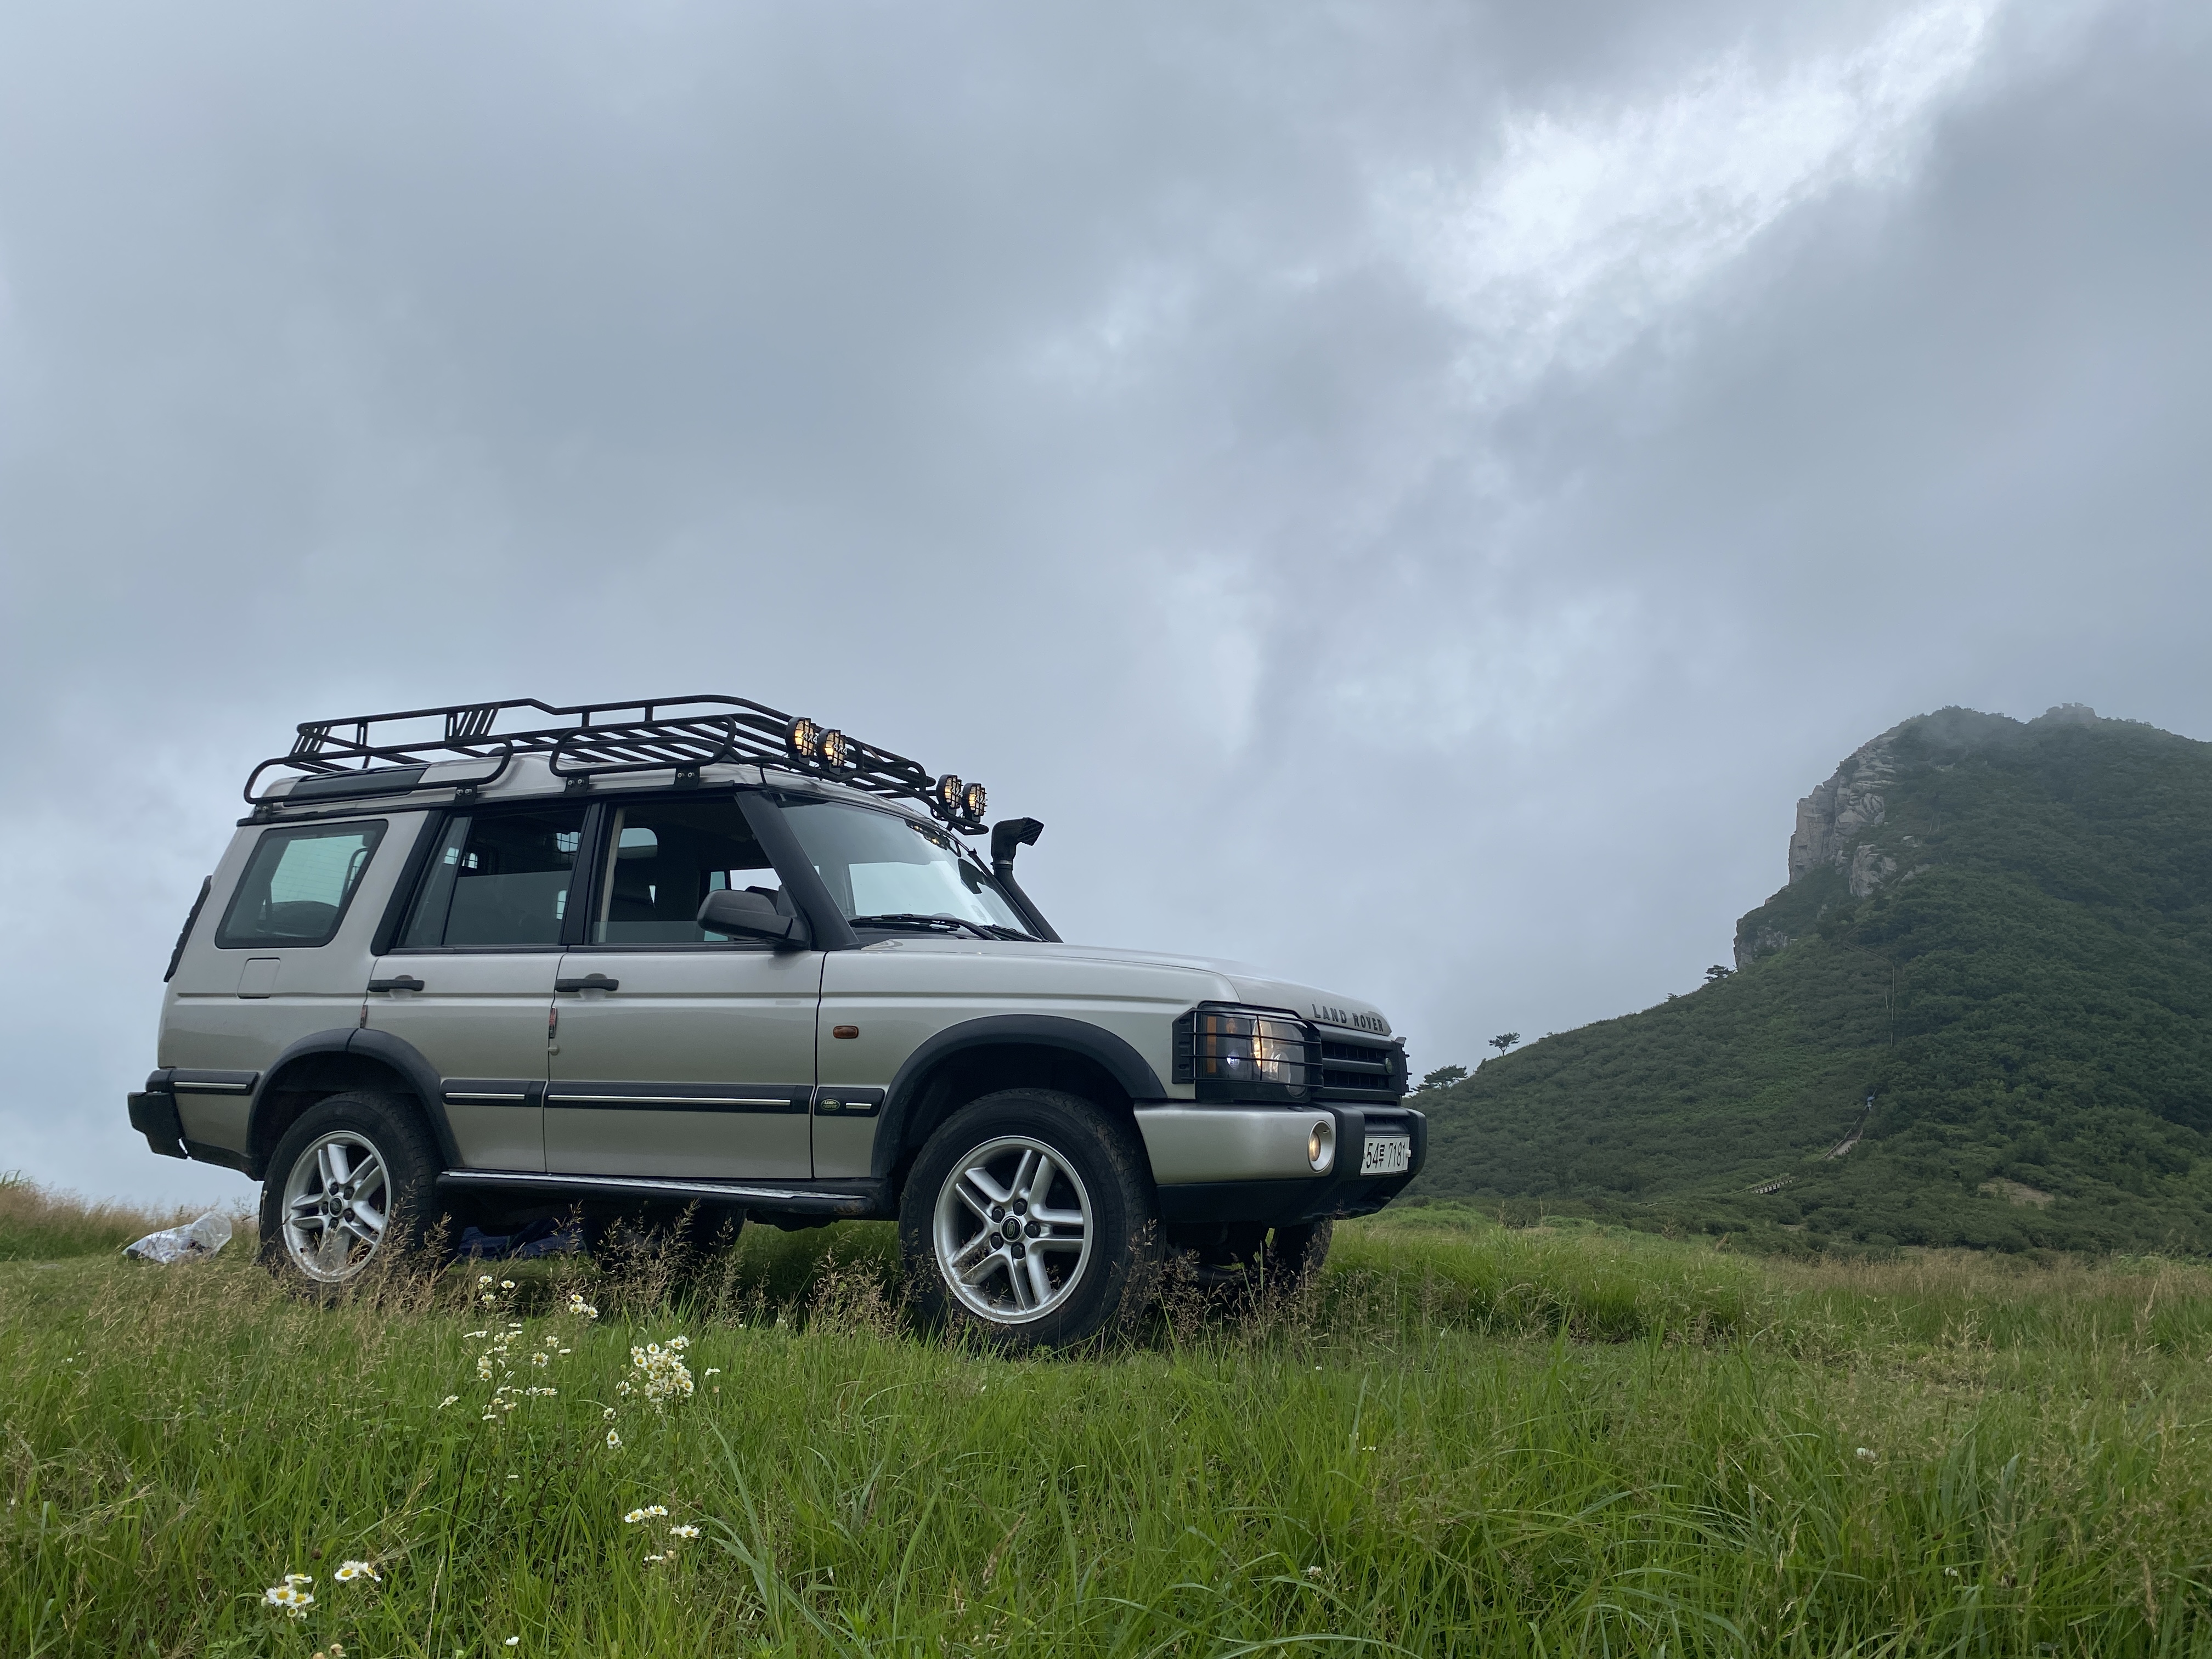 1999 land rover discovery